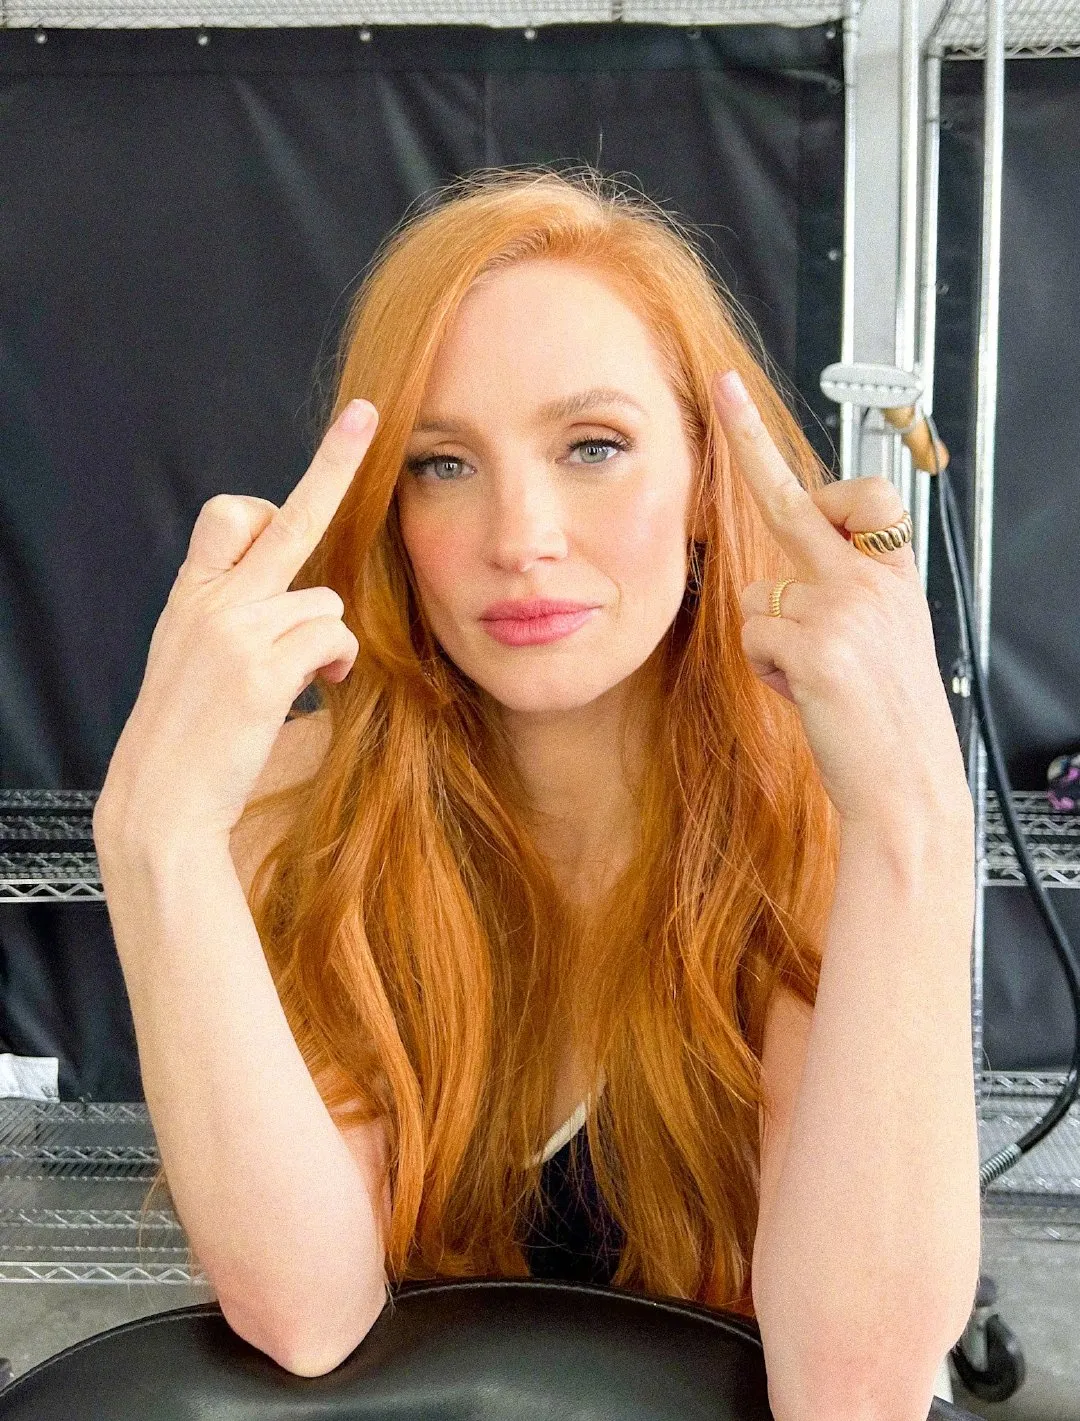 Jessica Chastain: "Happy 'Independence' Day from me and my reproductive rights." | FMV6